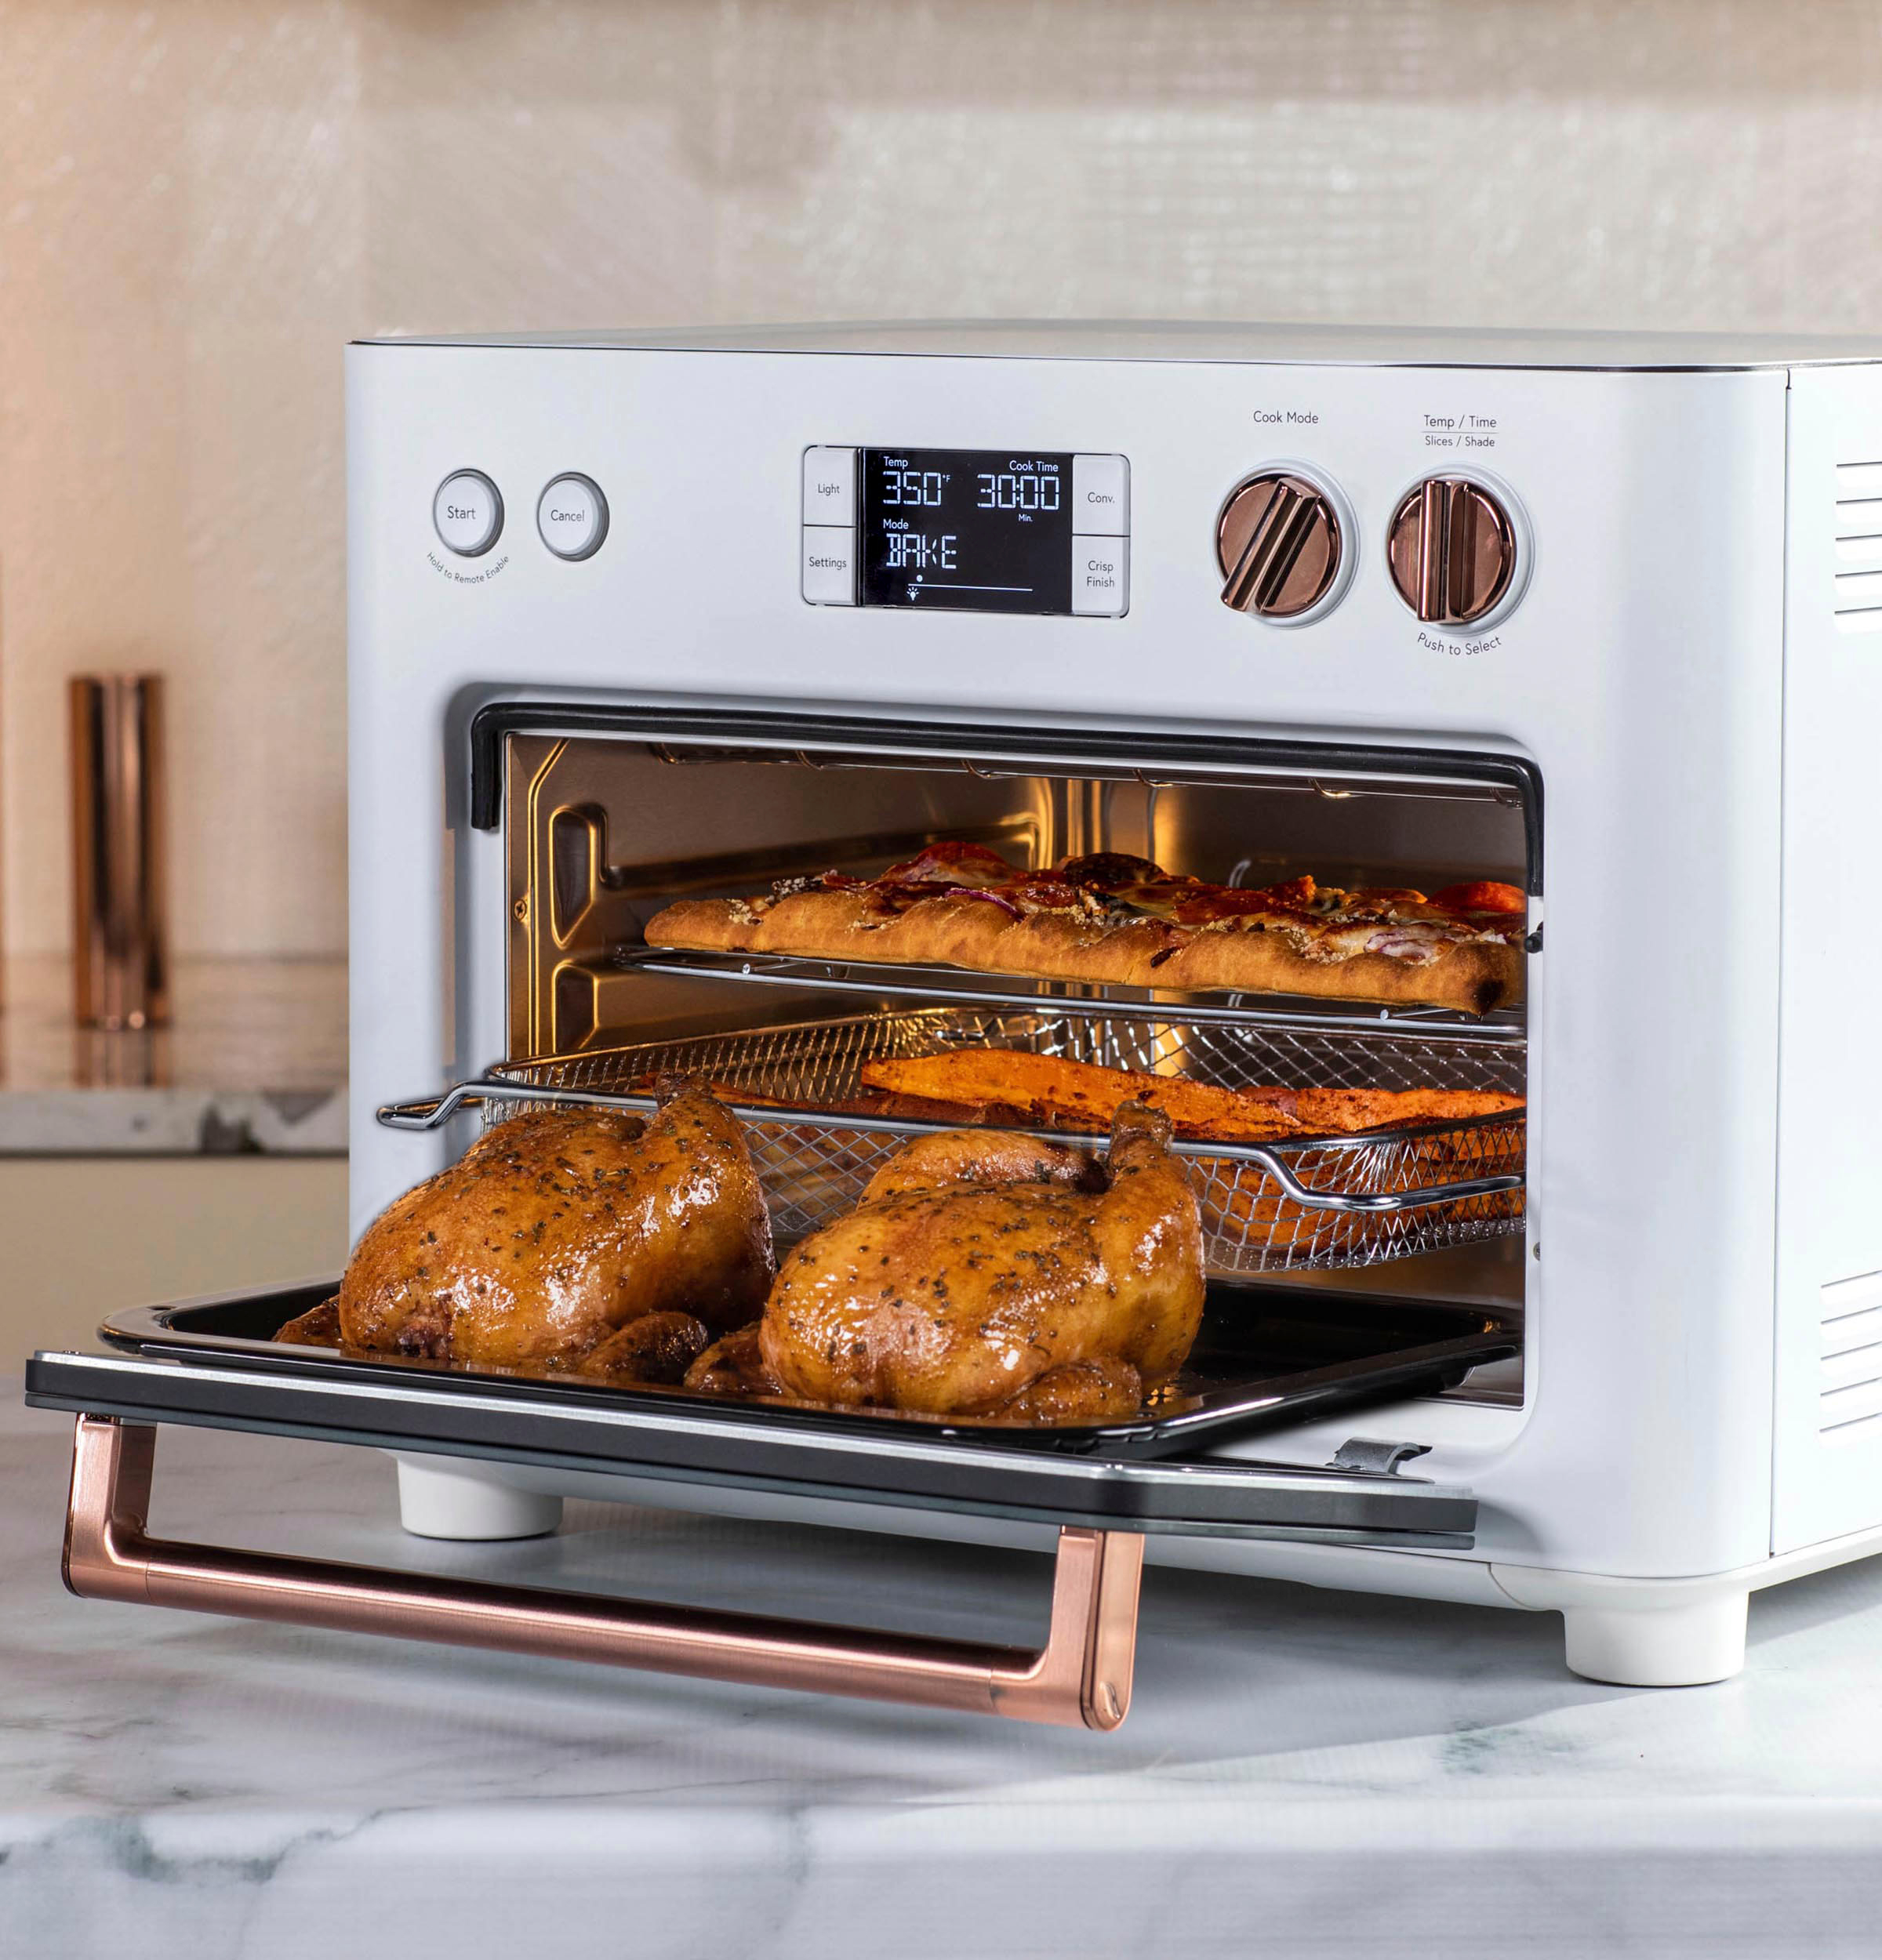 Toaster Oven Review - GE 8 in 1 toaster oven with air fryer 